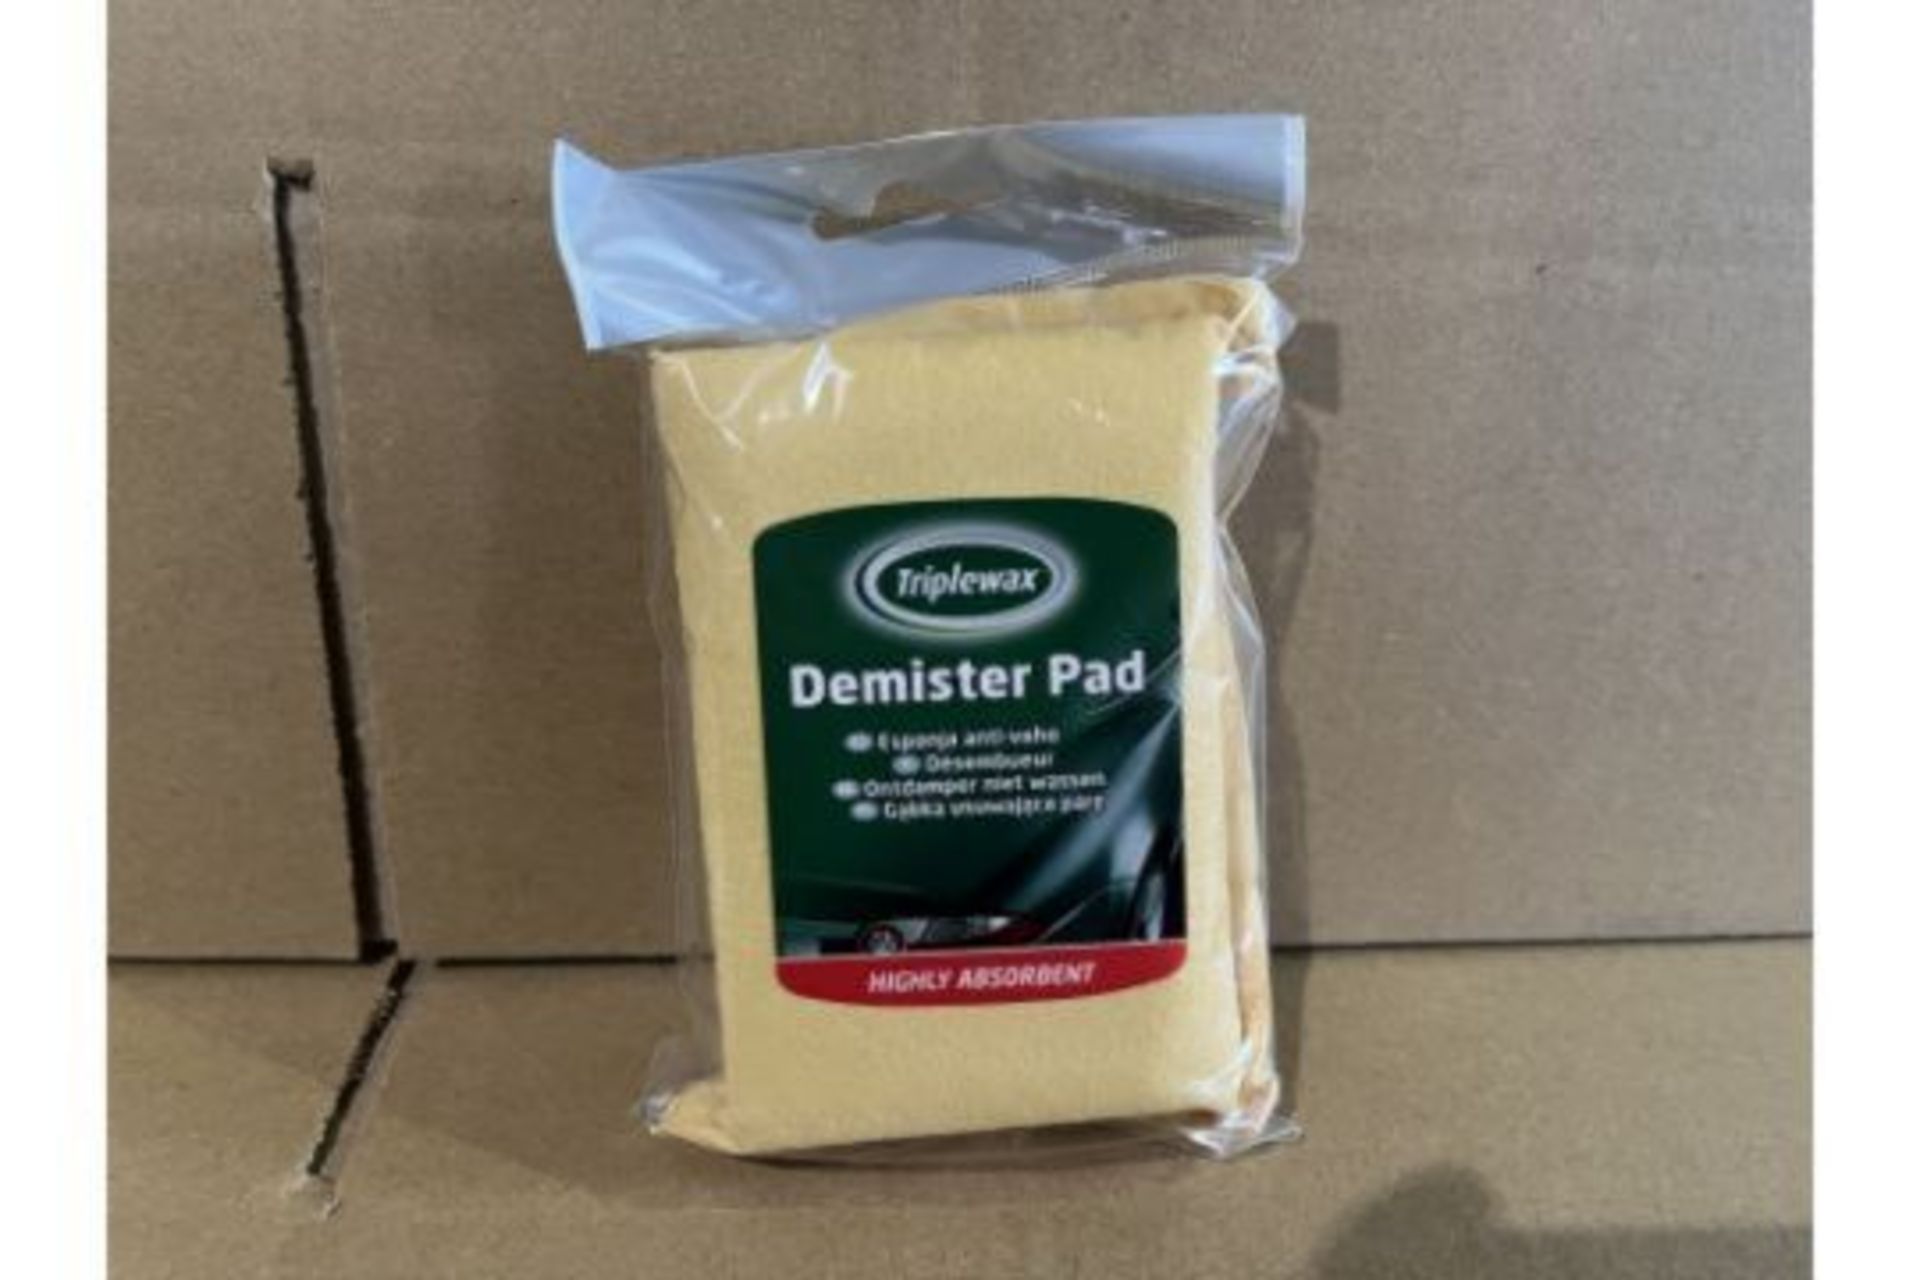 60 X BRAND NEW TRIPLEWAX DEMISTER PADS IN 5 BOXES R15